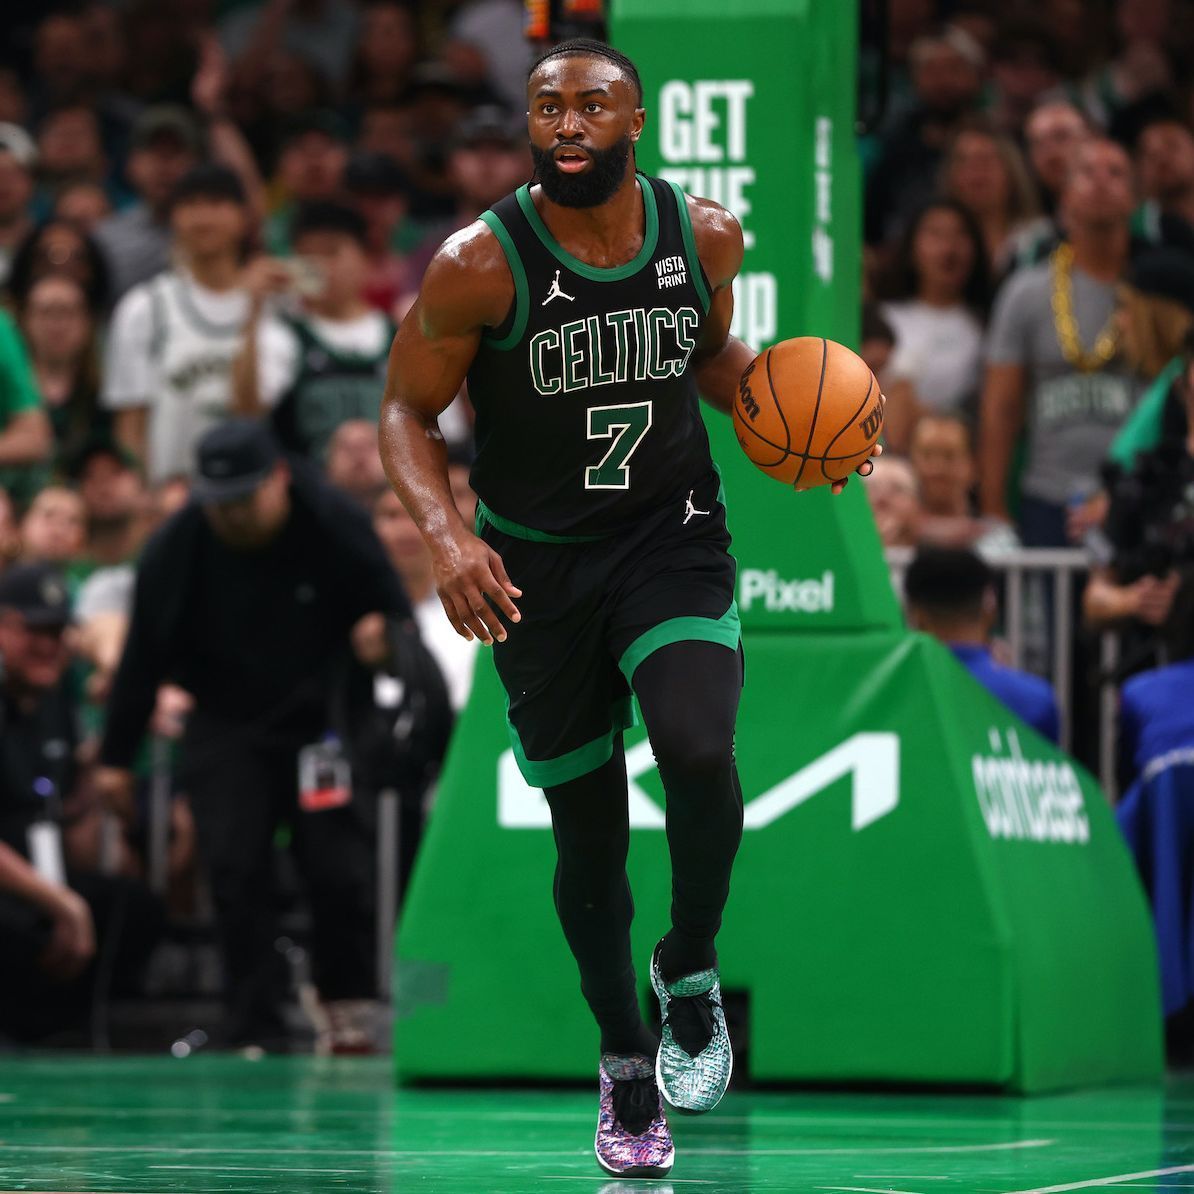 Jaylen Brown, the genius who also plays basketball for the Celtics